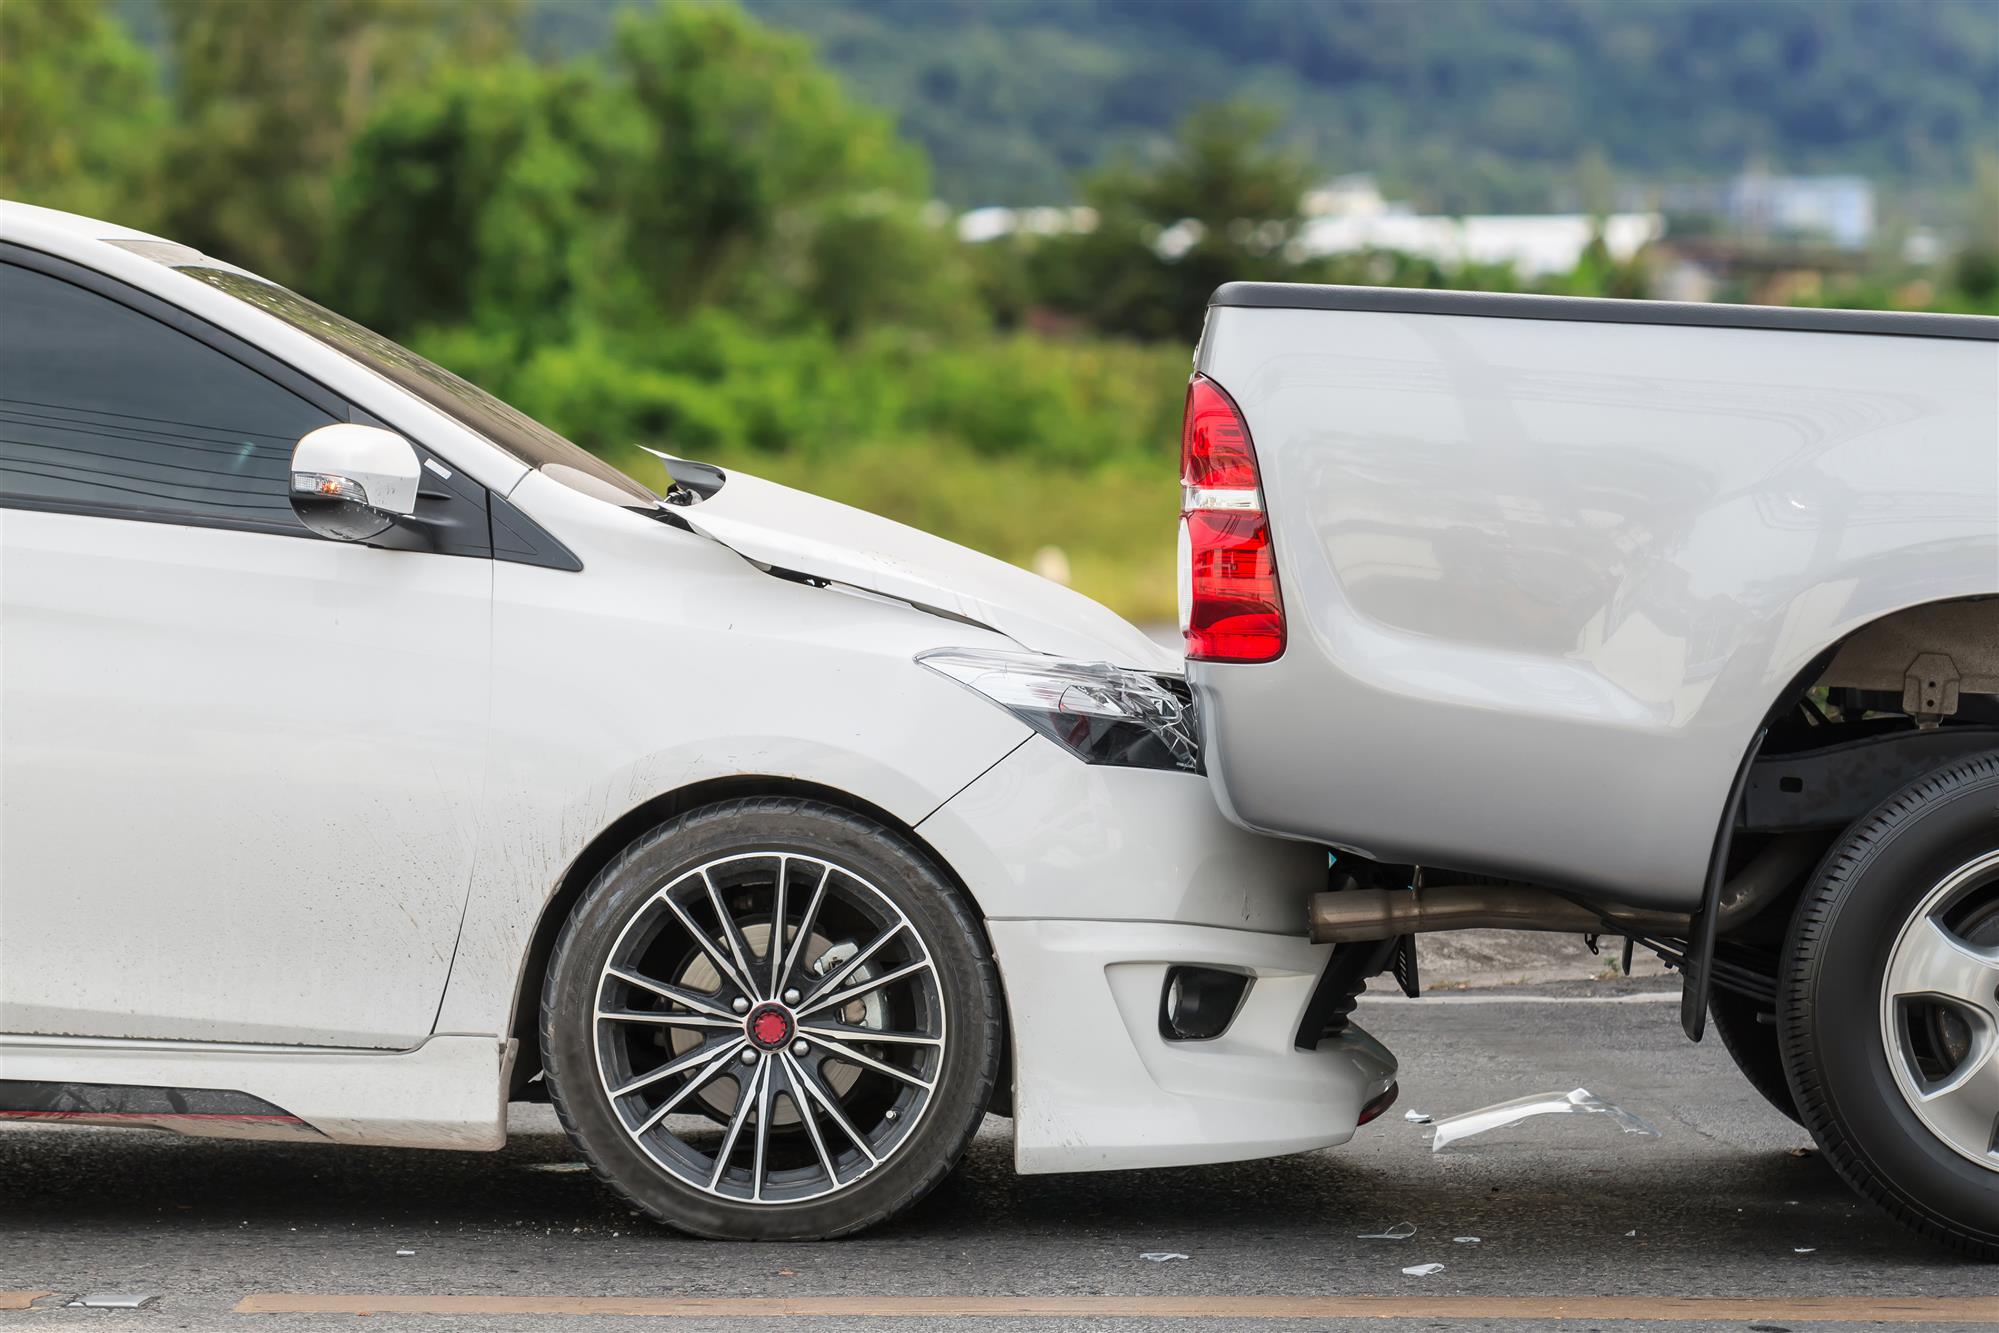 Rear End Car Accidents